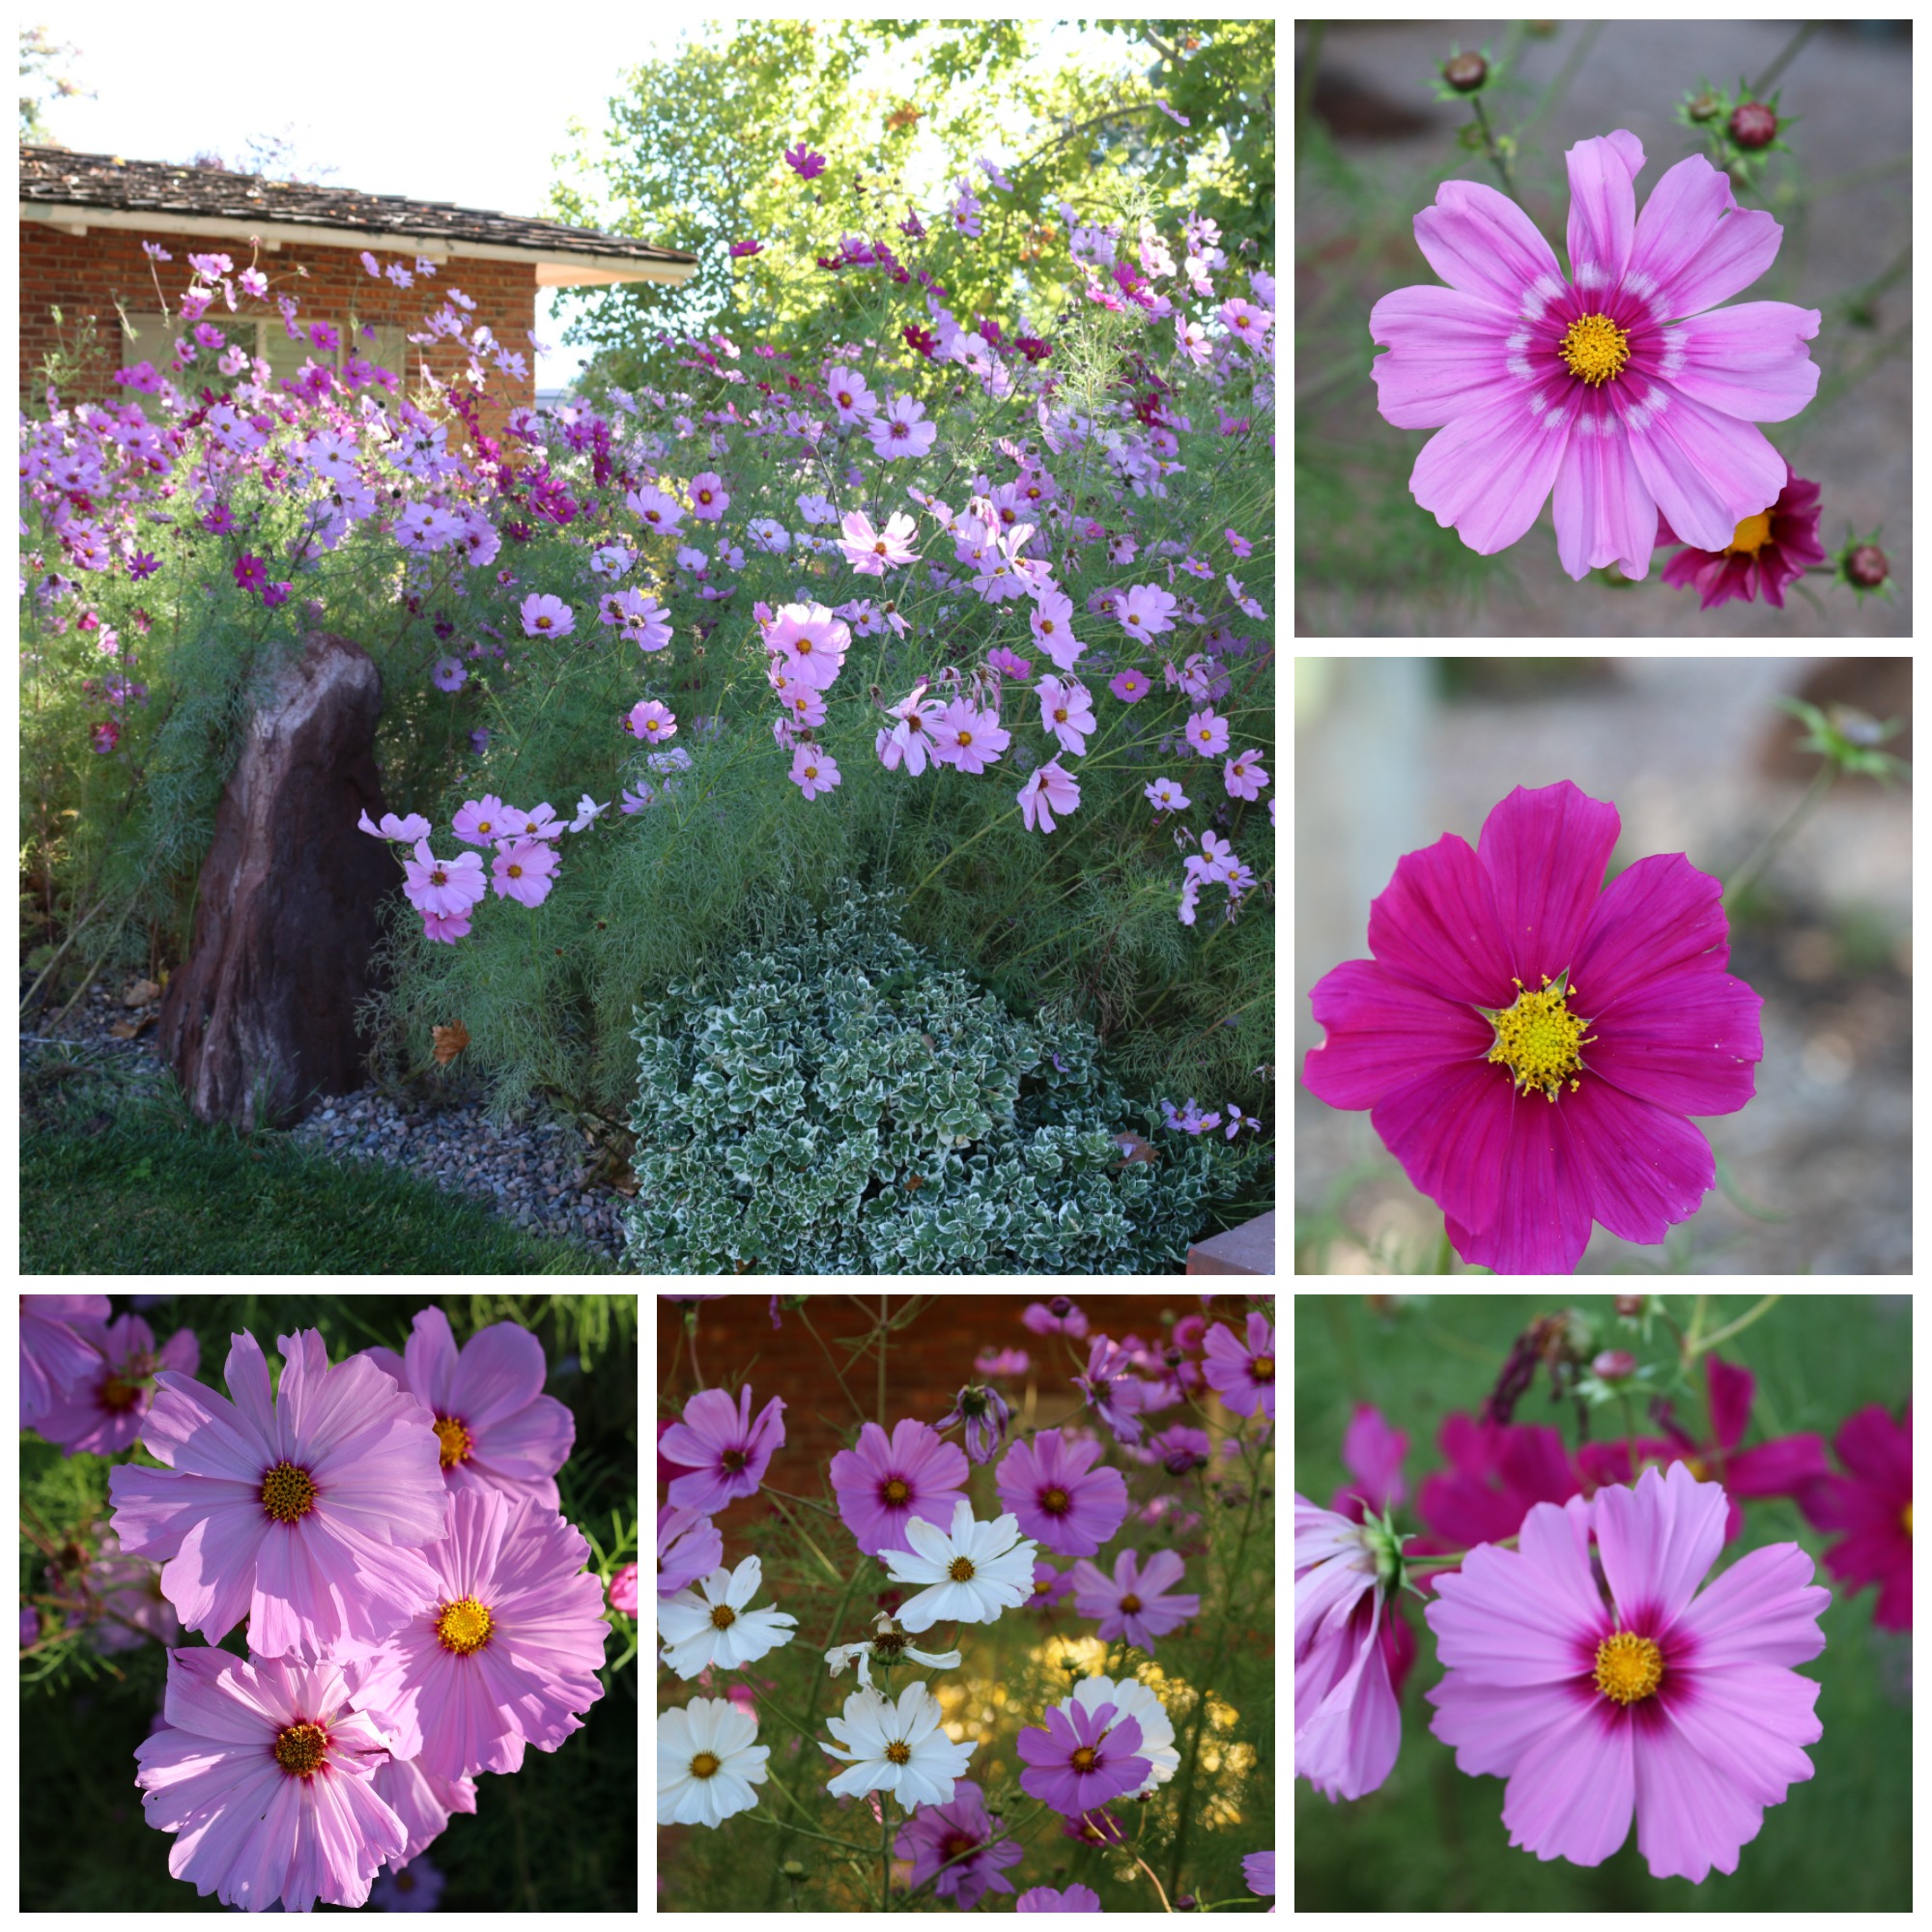 New Mexico Cosmos - nearly 7 feet tall, I have never seen anything like it. All I did was water them. The flowers are enormous. The most beautiful COSMOS I have ever seen in my entire life. Absolutely breathtaking. 